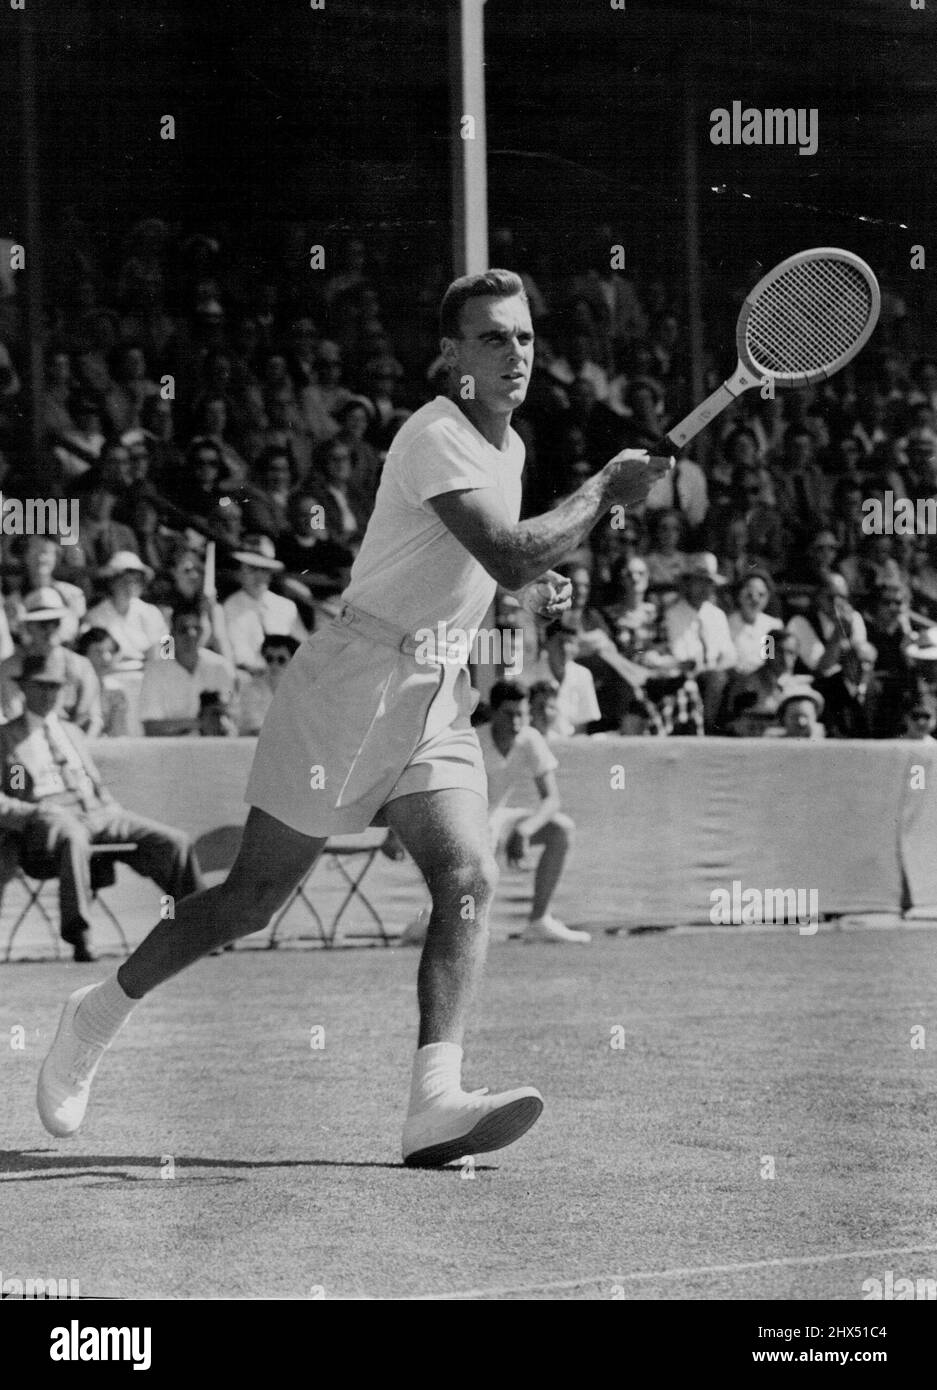 E. V. Seixas (United States Davis Cup team) at the end of a powerful forehand drive in his match against G.A. Worthington, of Auckland, former Australian Davis Cup player. In an exhibition match each player won one set. January 01, 1952. (Photo by N.Z. Herald). Stock Photo